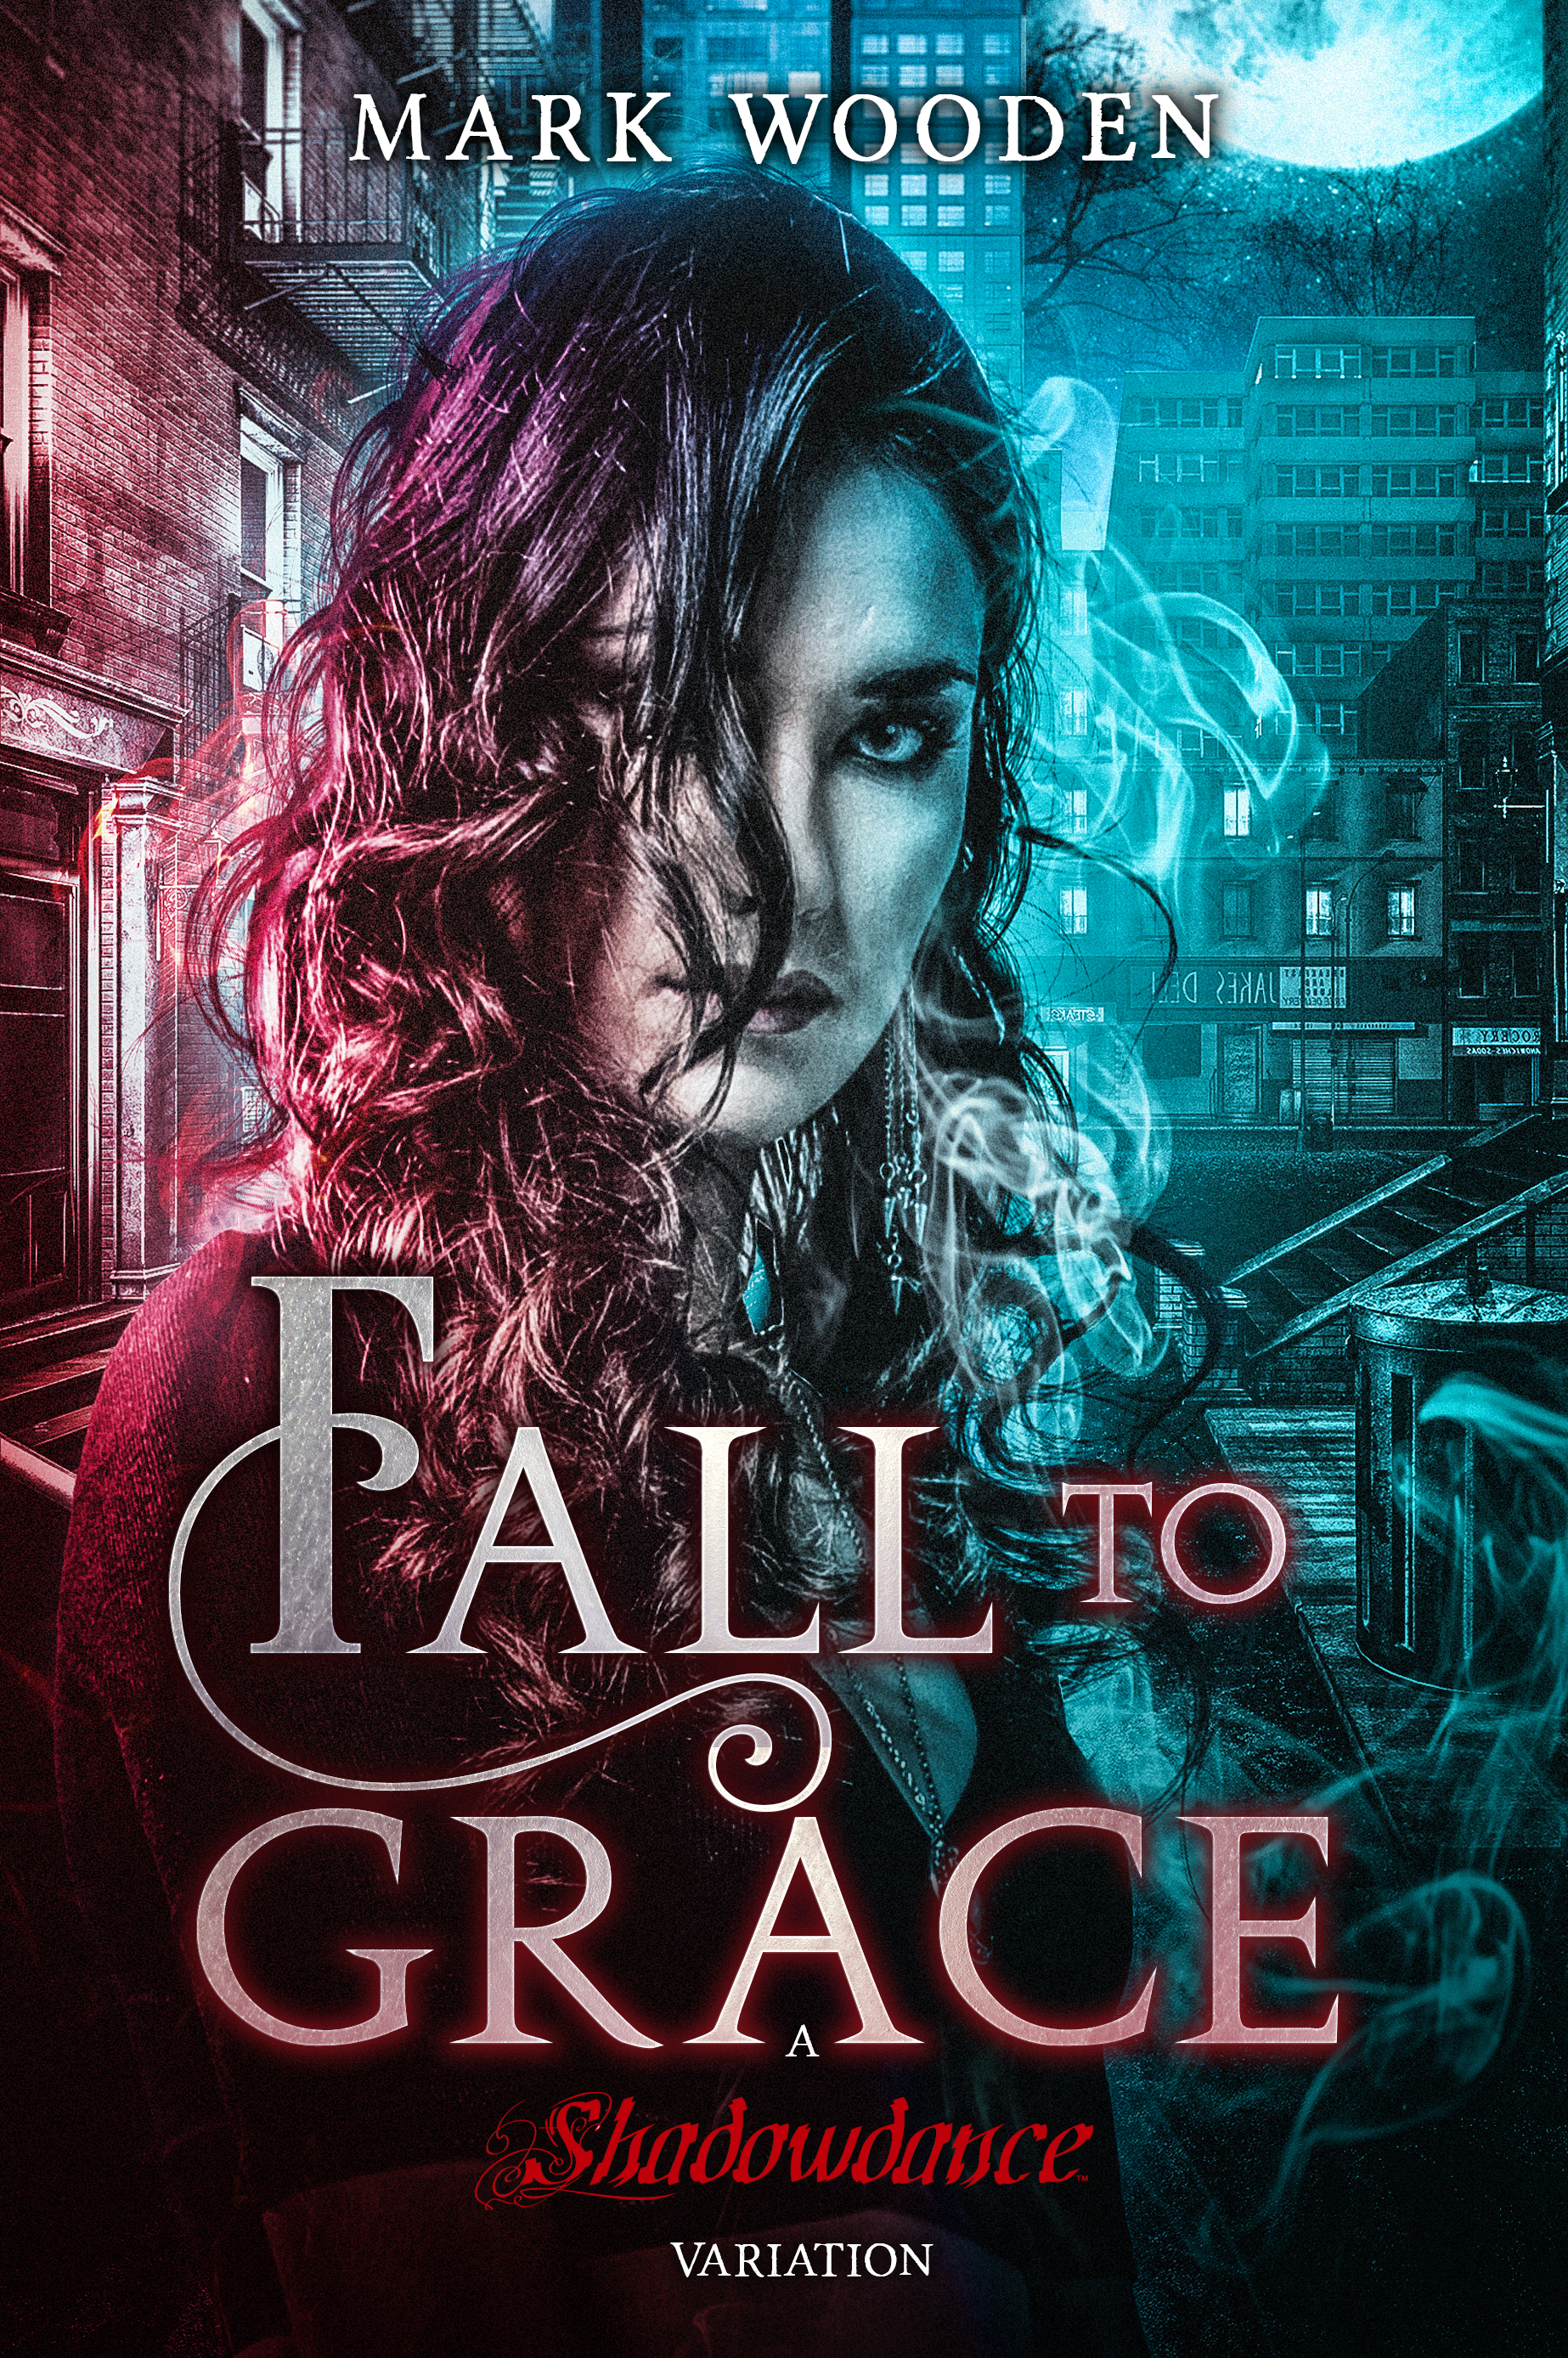 Fall to Grace ebook cover, an example of Mark's writing